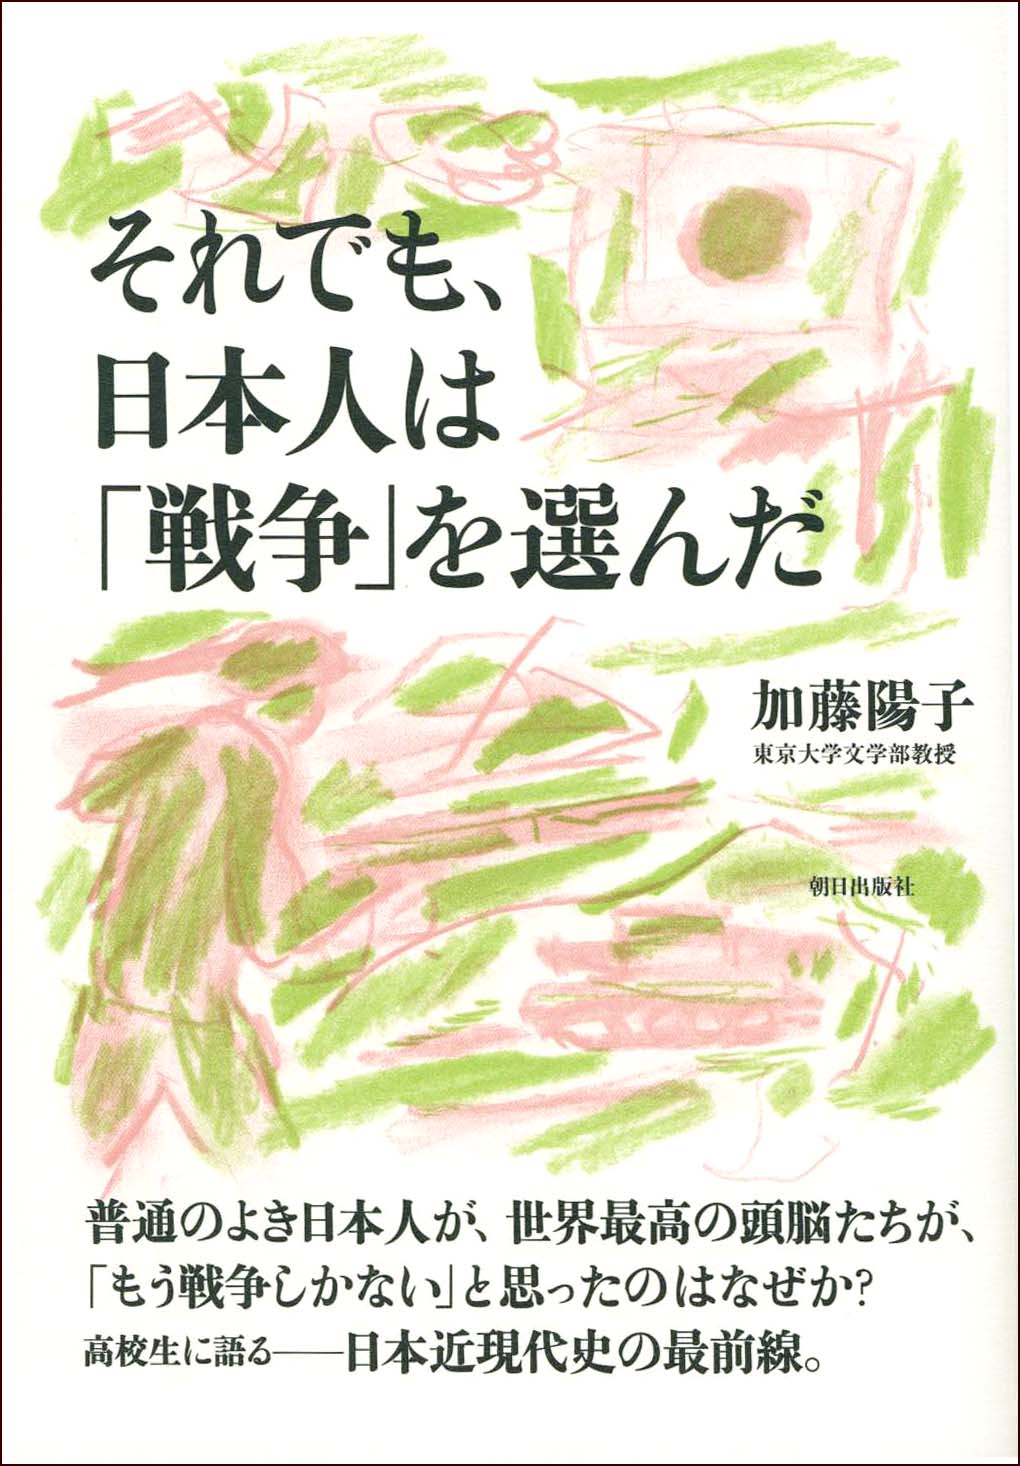 Illustrations drawn in pink and blue on a white cover